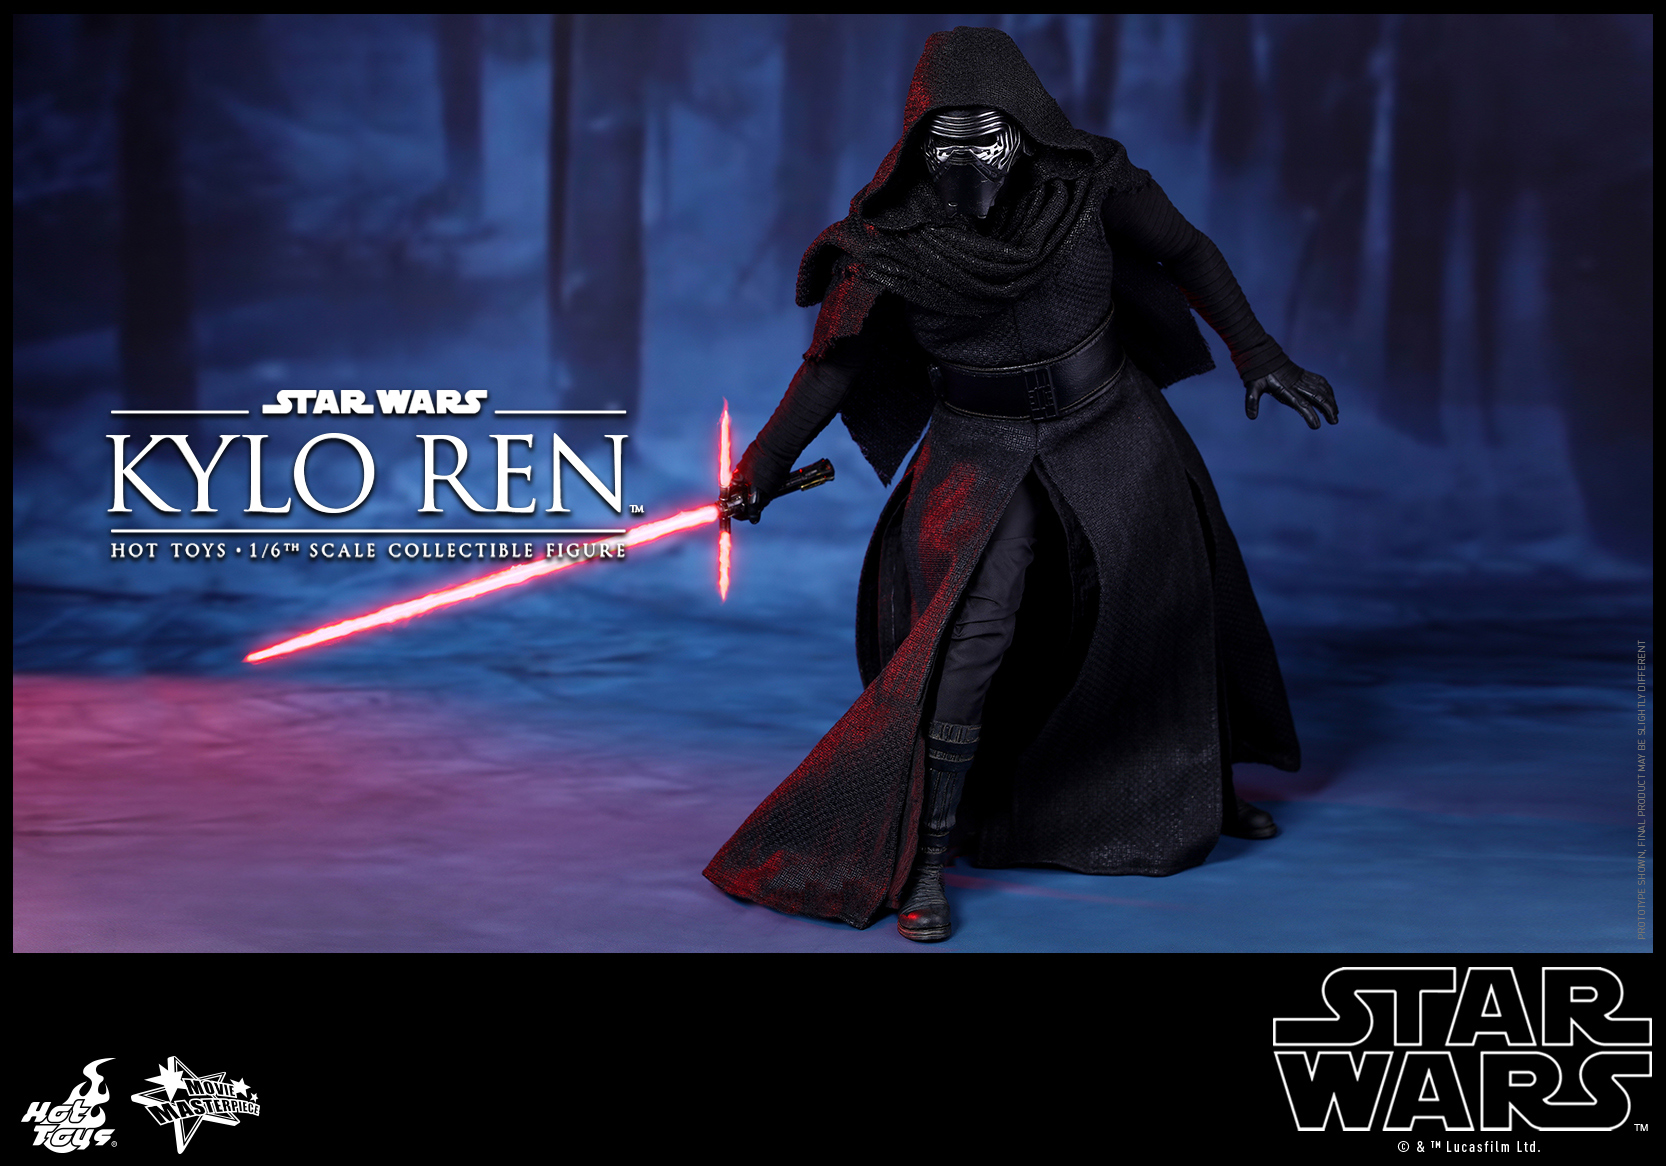 Hot Toys - Star Wars - The Force Awakens - Kylo Ren Collectible Figure